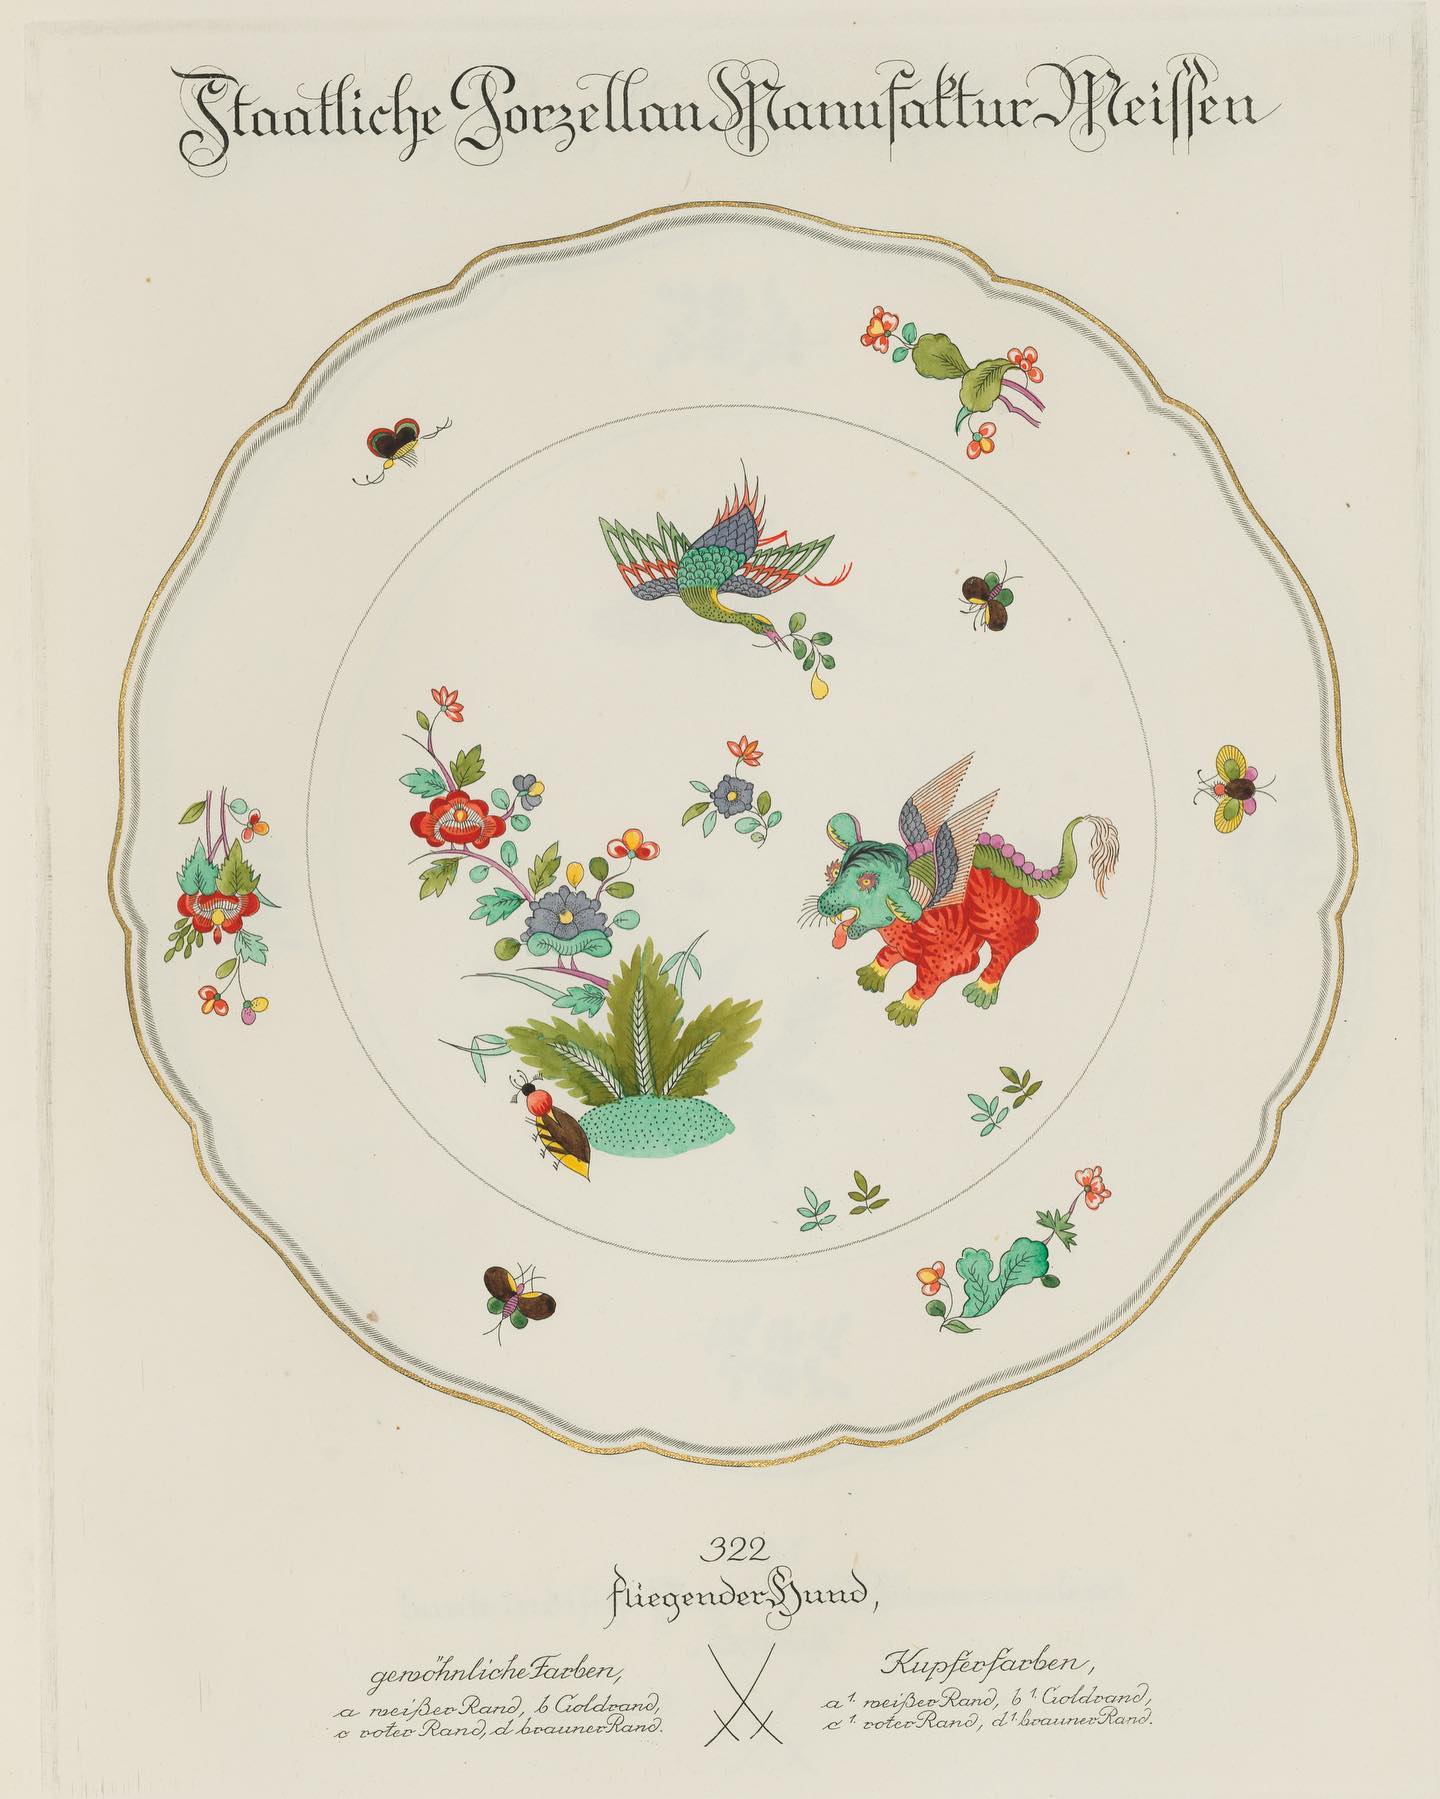 A Sample Book of Porcelain Patterns by Unknown Artist - c. 1920 - 41 × 33 cm Metropolitan Museum of Art